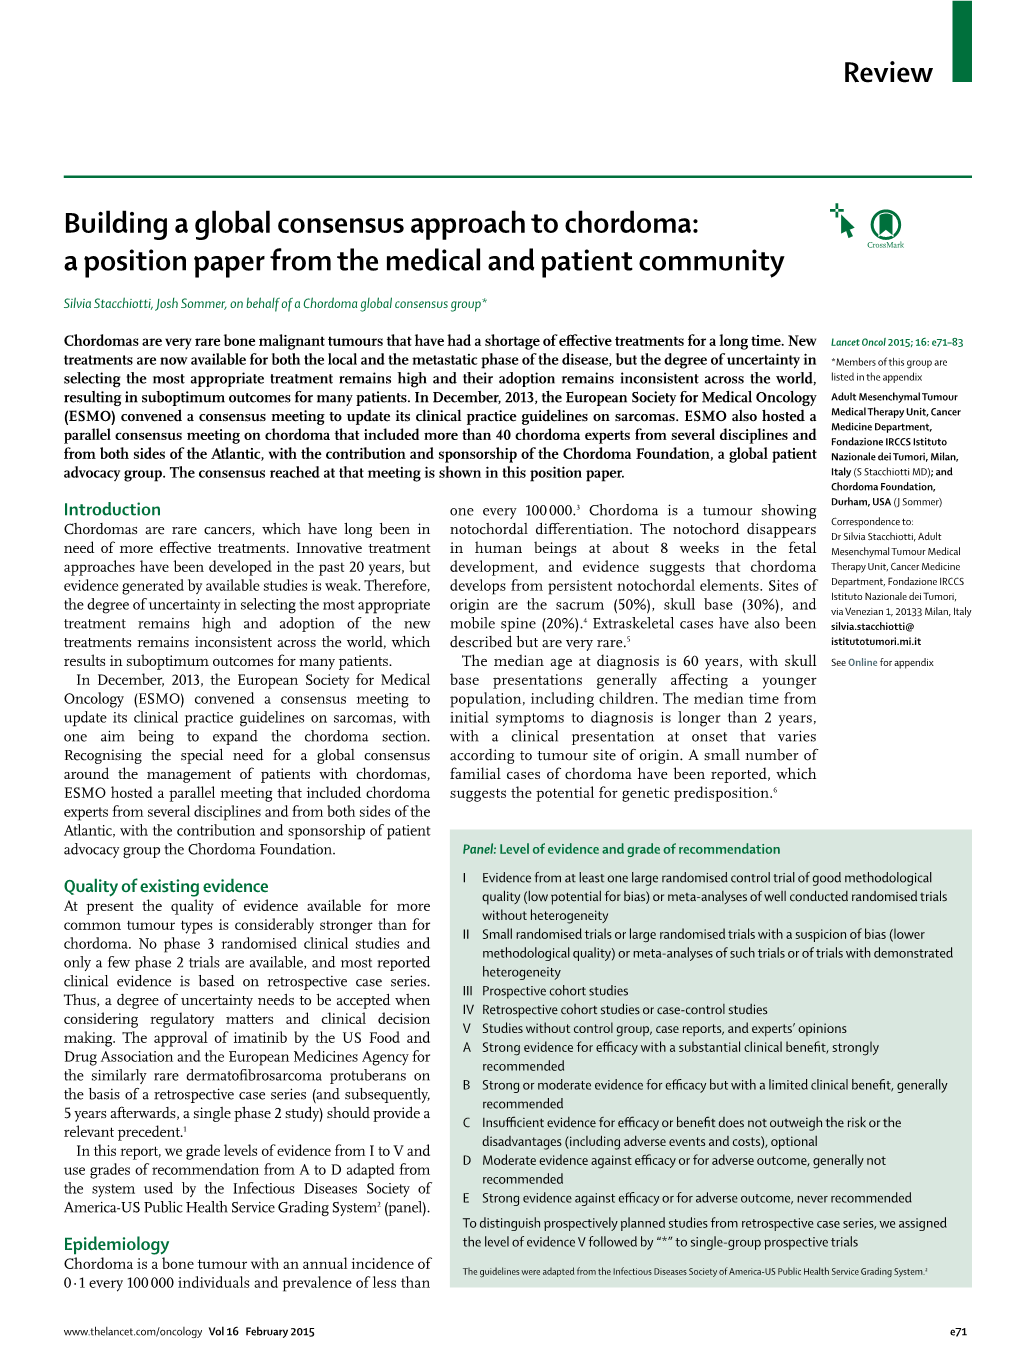 Building a Global Consensus Approach to Chordoma: a Position Paper from the Medical and Patient Community